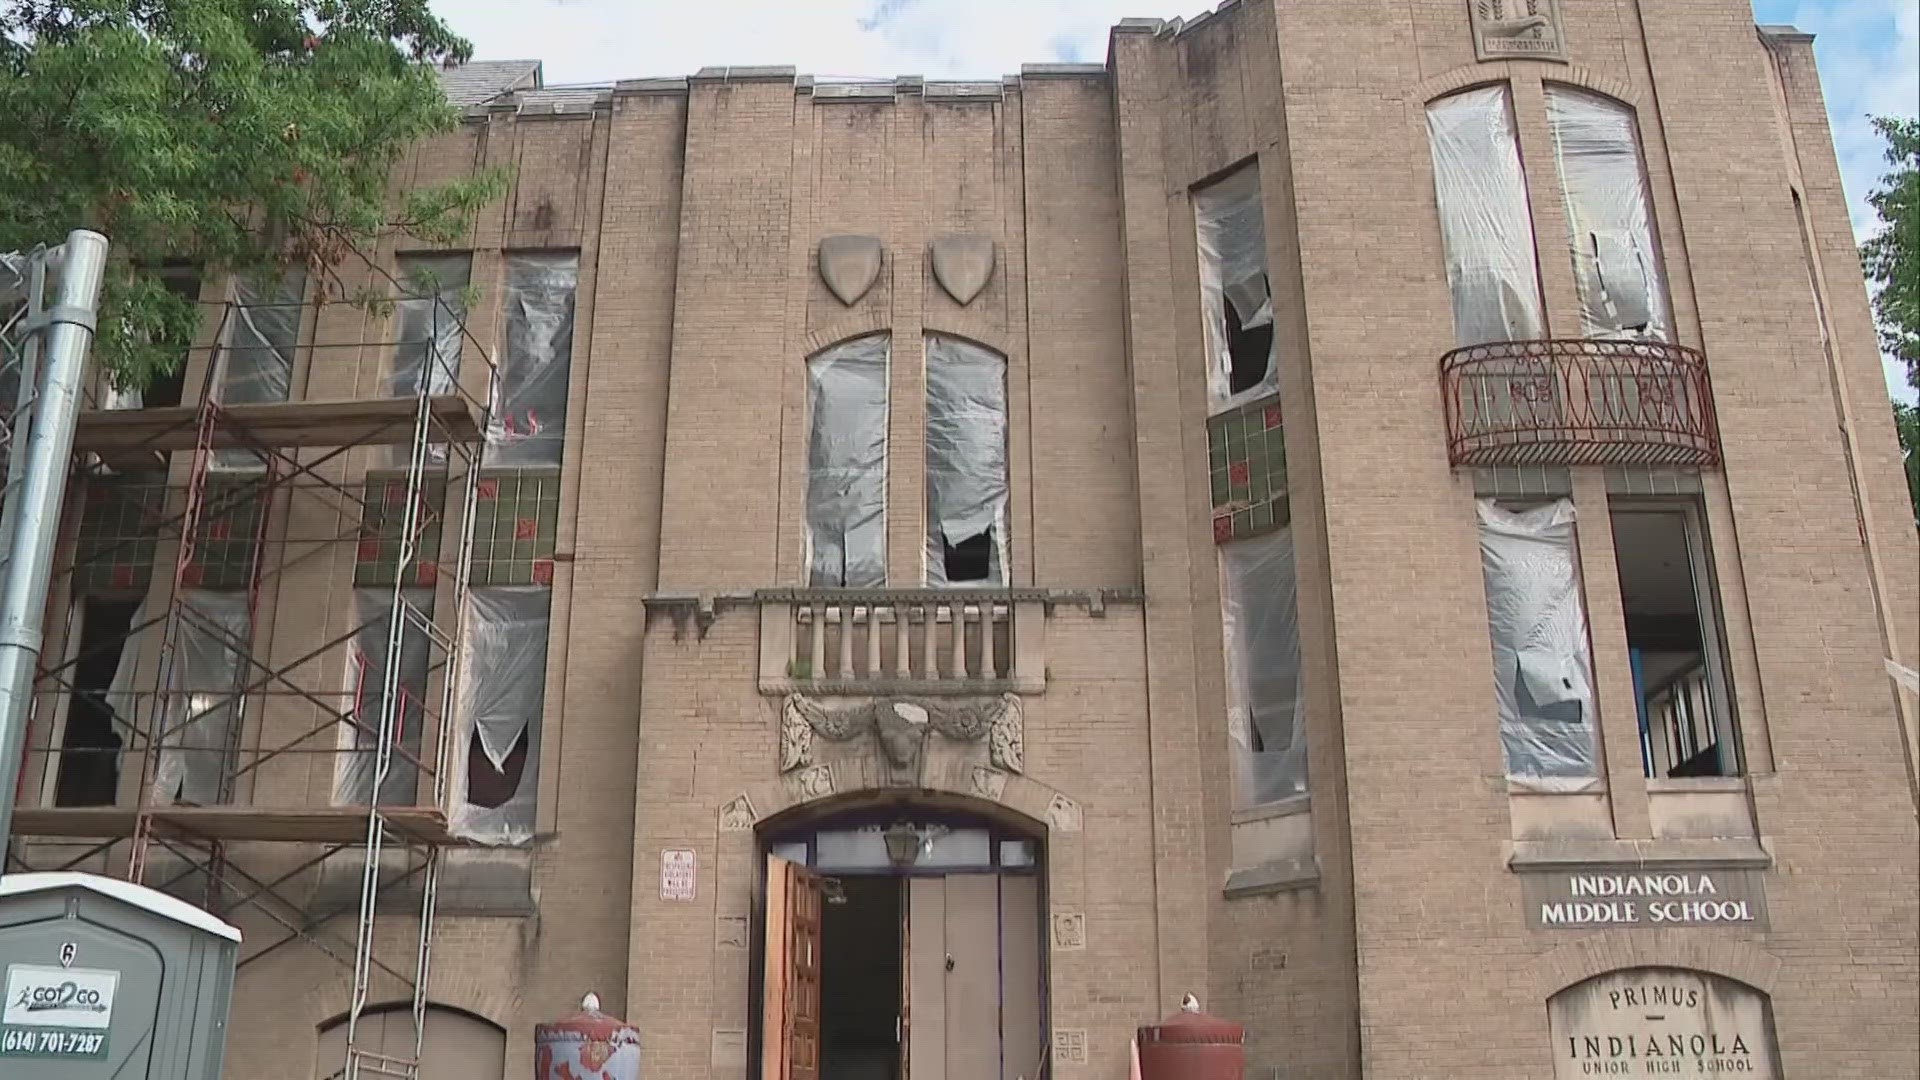 Metro Schools is renovating the former Indianola Junior High School on 19th Street with plans to expand its STEM-based middle and high school program.